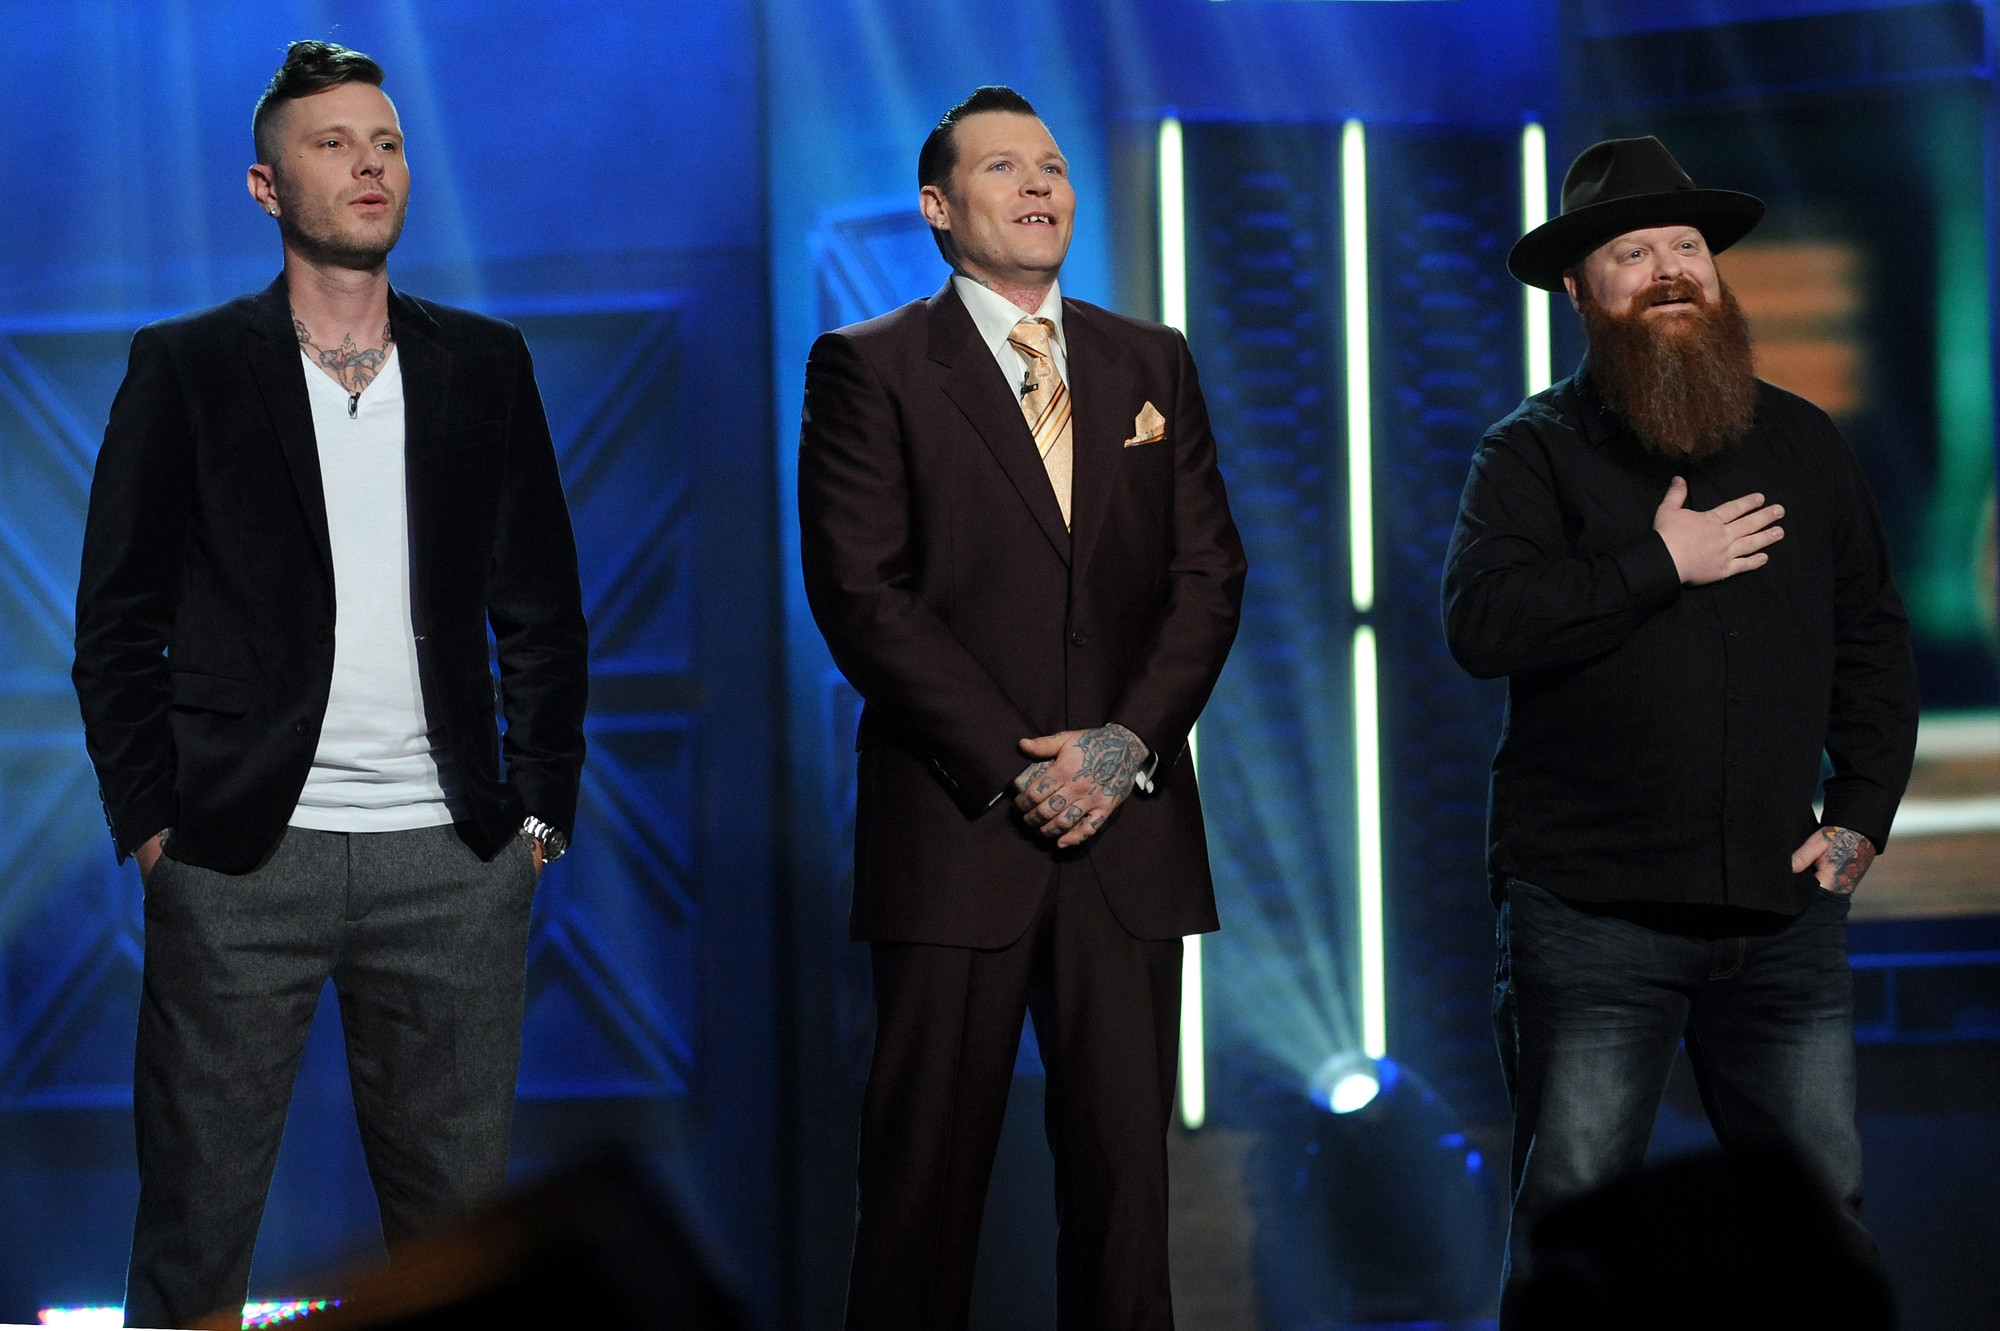 Siuda, Cleen Rock One and Jason Clay Dunn, from left, were the three contestants who had the chance to win $100,000 at the season 5 “Ink Master” finale.